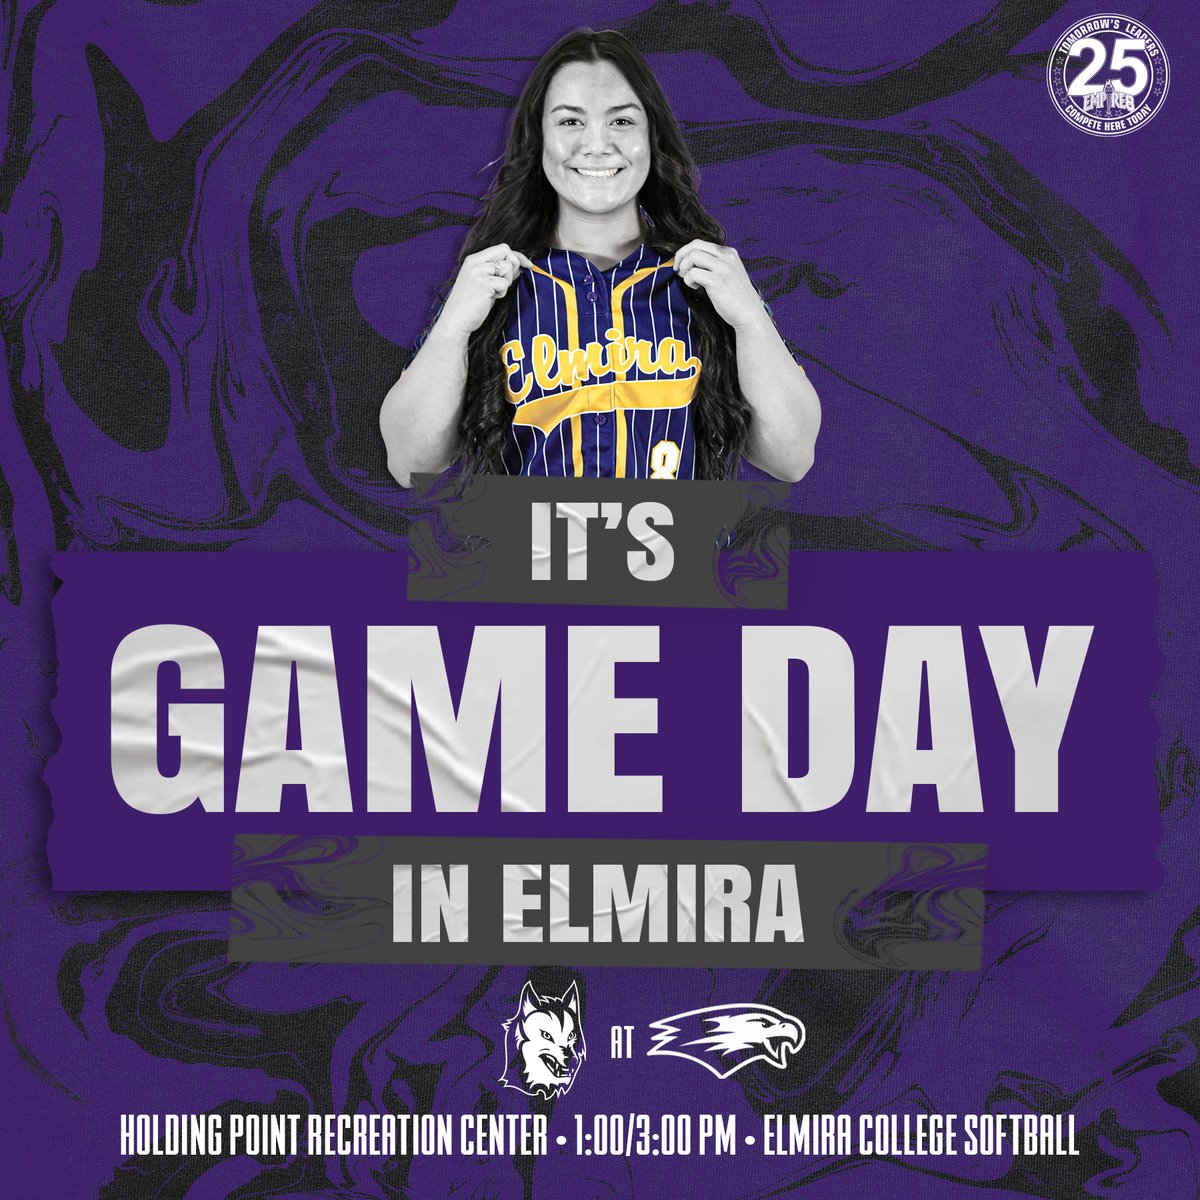 Back home for more this afternoon as @ElmiraCollegeSB hosts the Wolves in a pair of @Empire8 matchups! 🥎

🆚 Keuka
🕐 1:00/3:00 PM
📍 Horseheads, NY | Holding Point
📺 & 📊: bit.ly/3lKw2jp

#TogetherWeFly #FightOn4EC #ElmiraProud